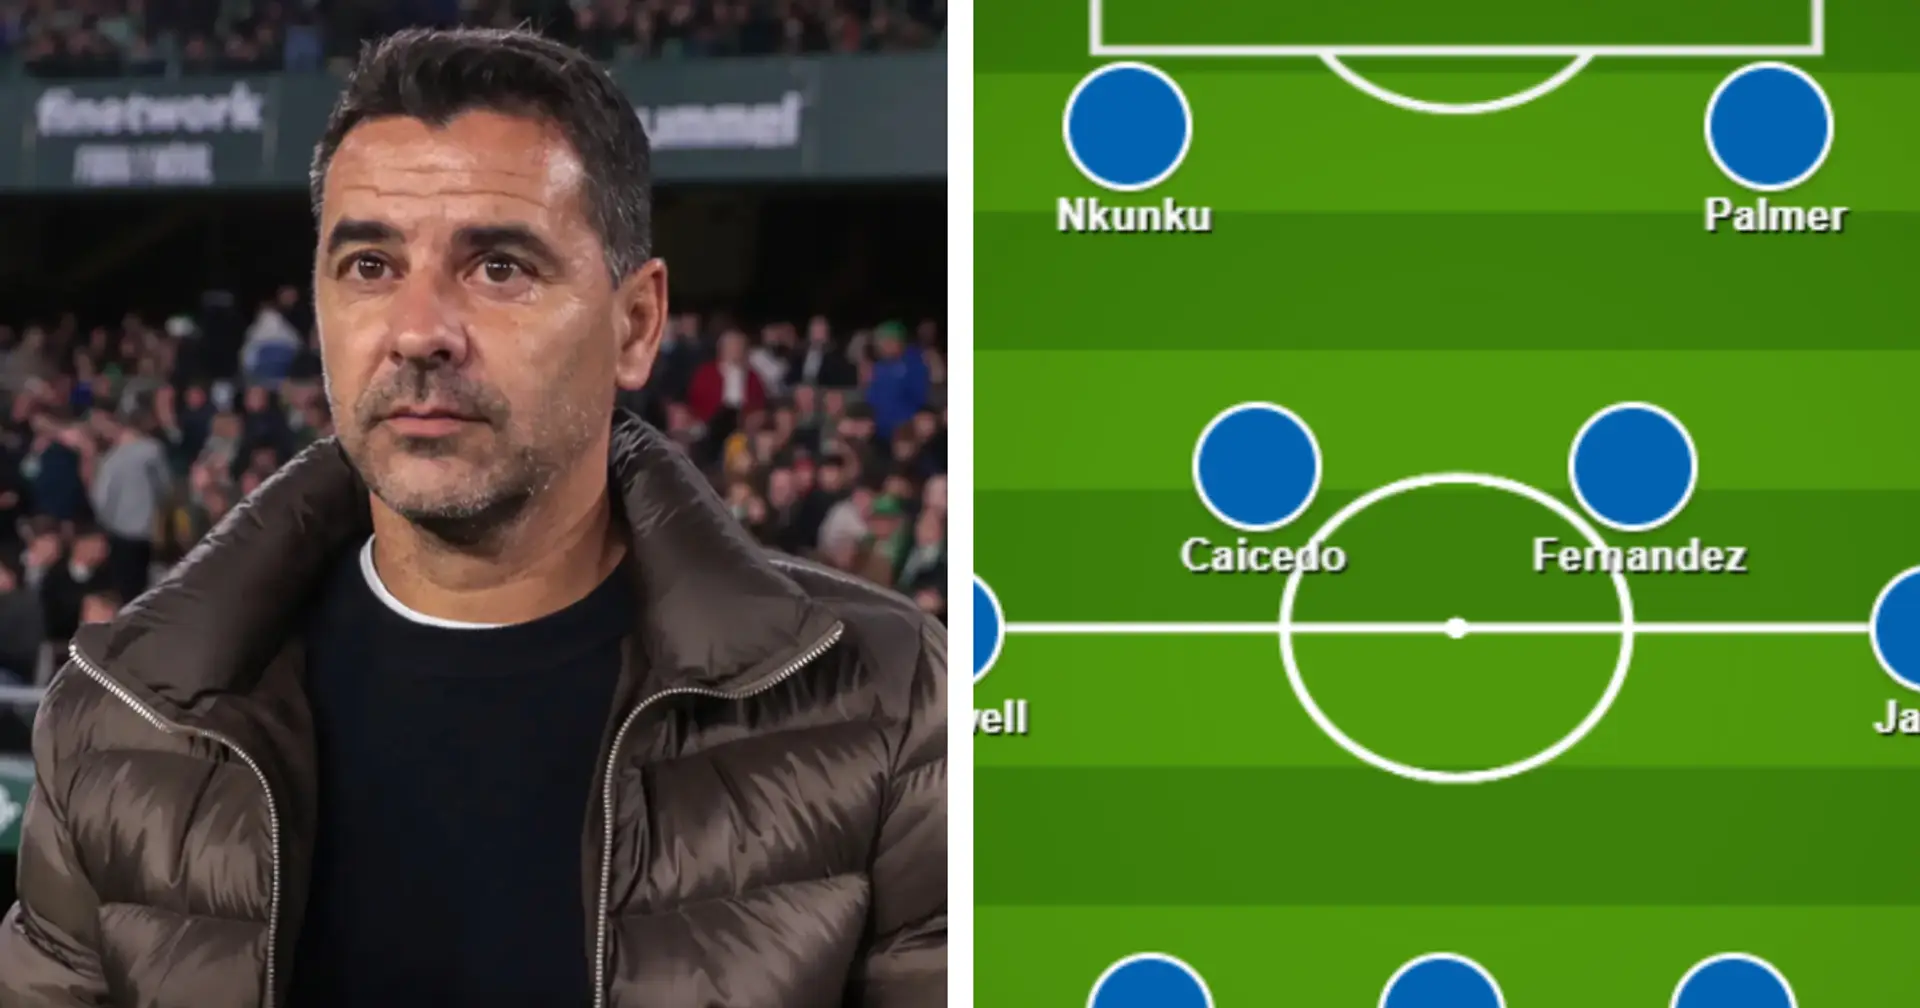 Michel at Chelsea: tactical profile, biggest strengths and possible XIs